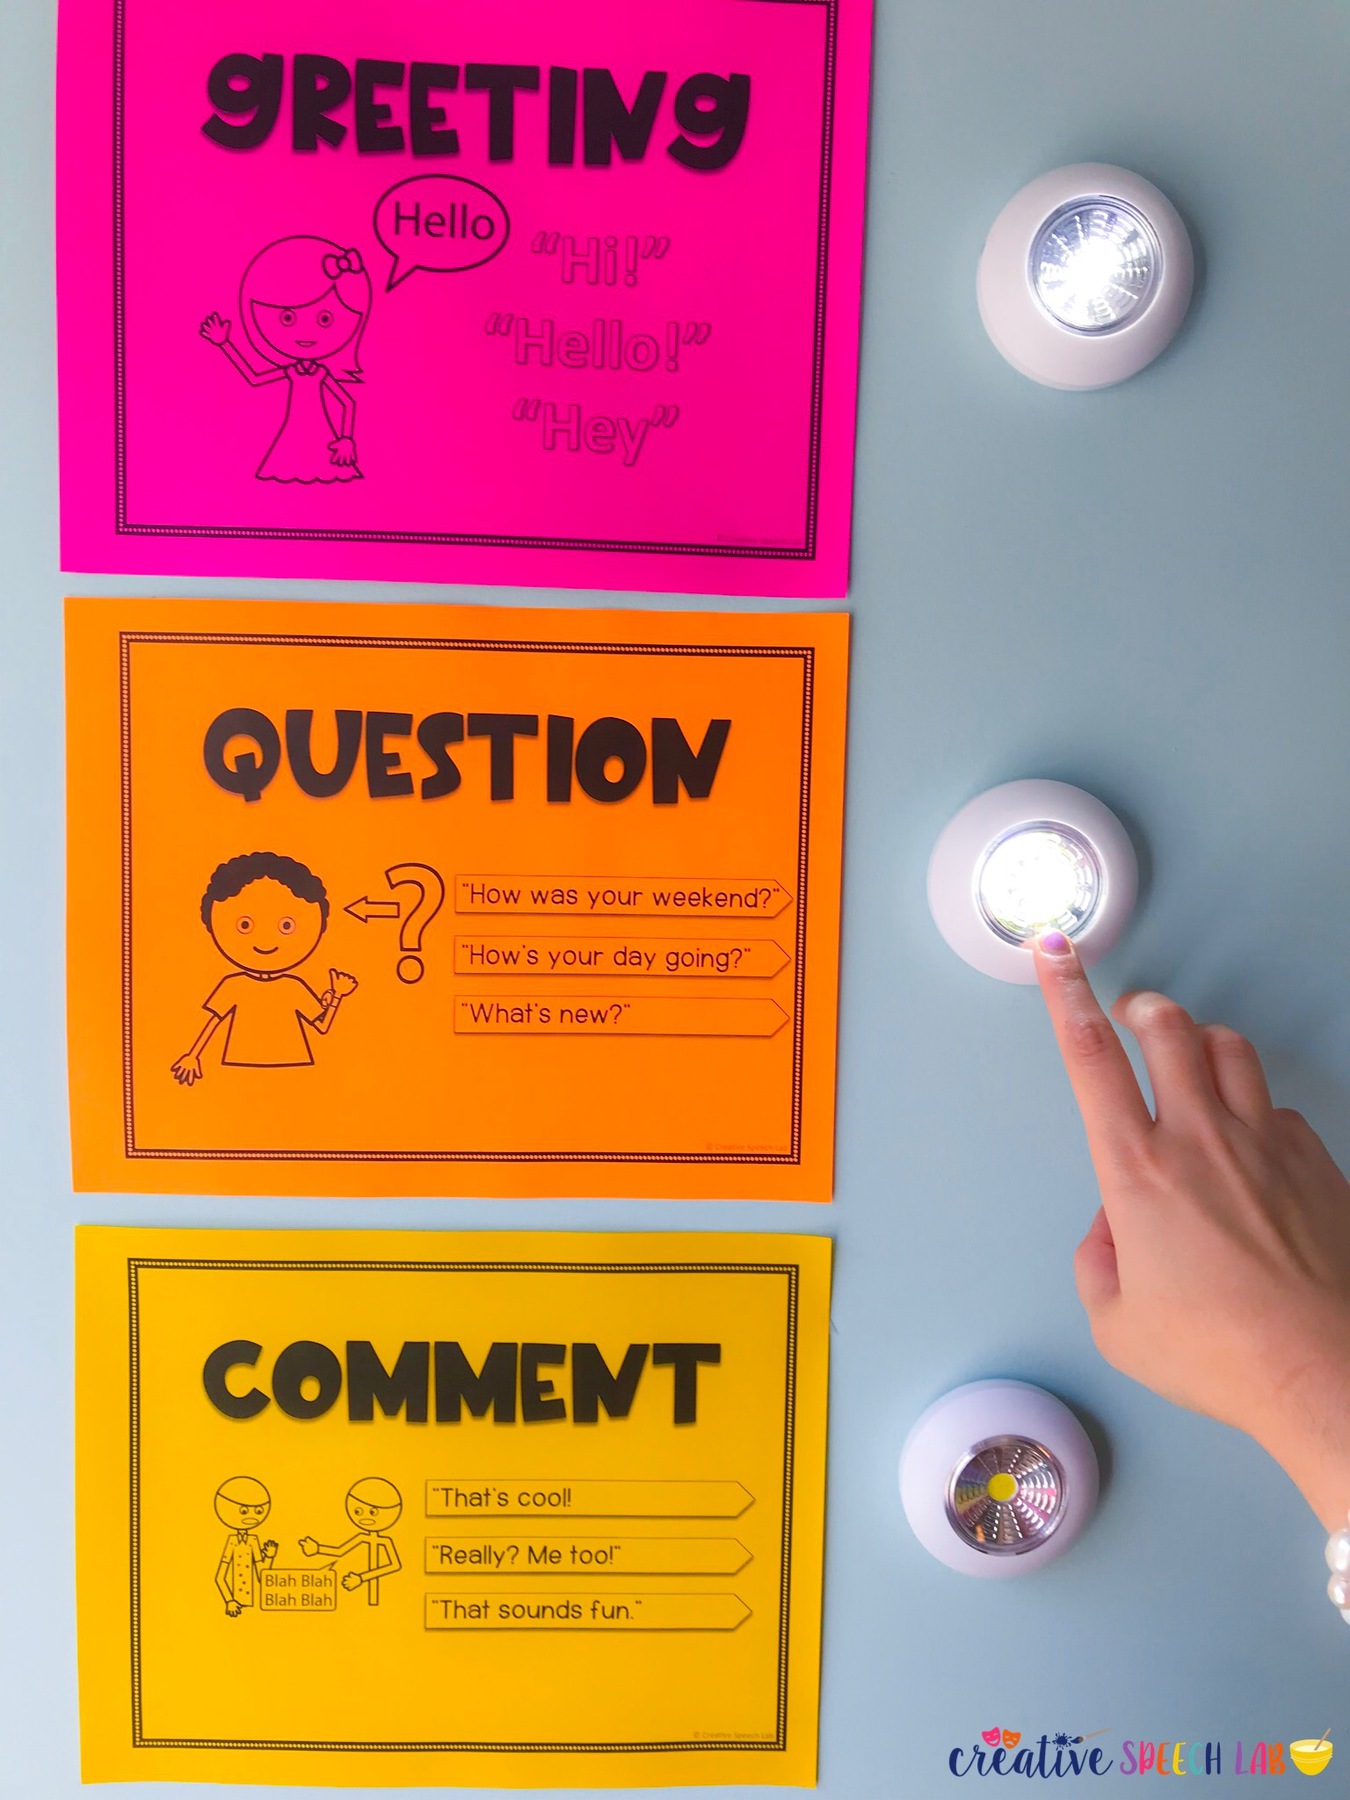 Speech therapy room decor displaying conversation visuals with tap lights.